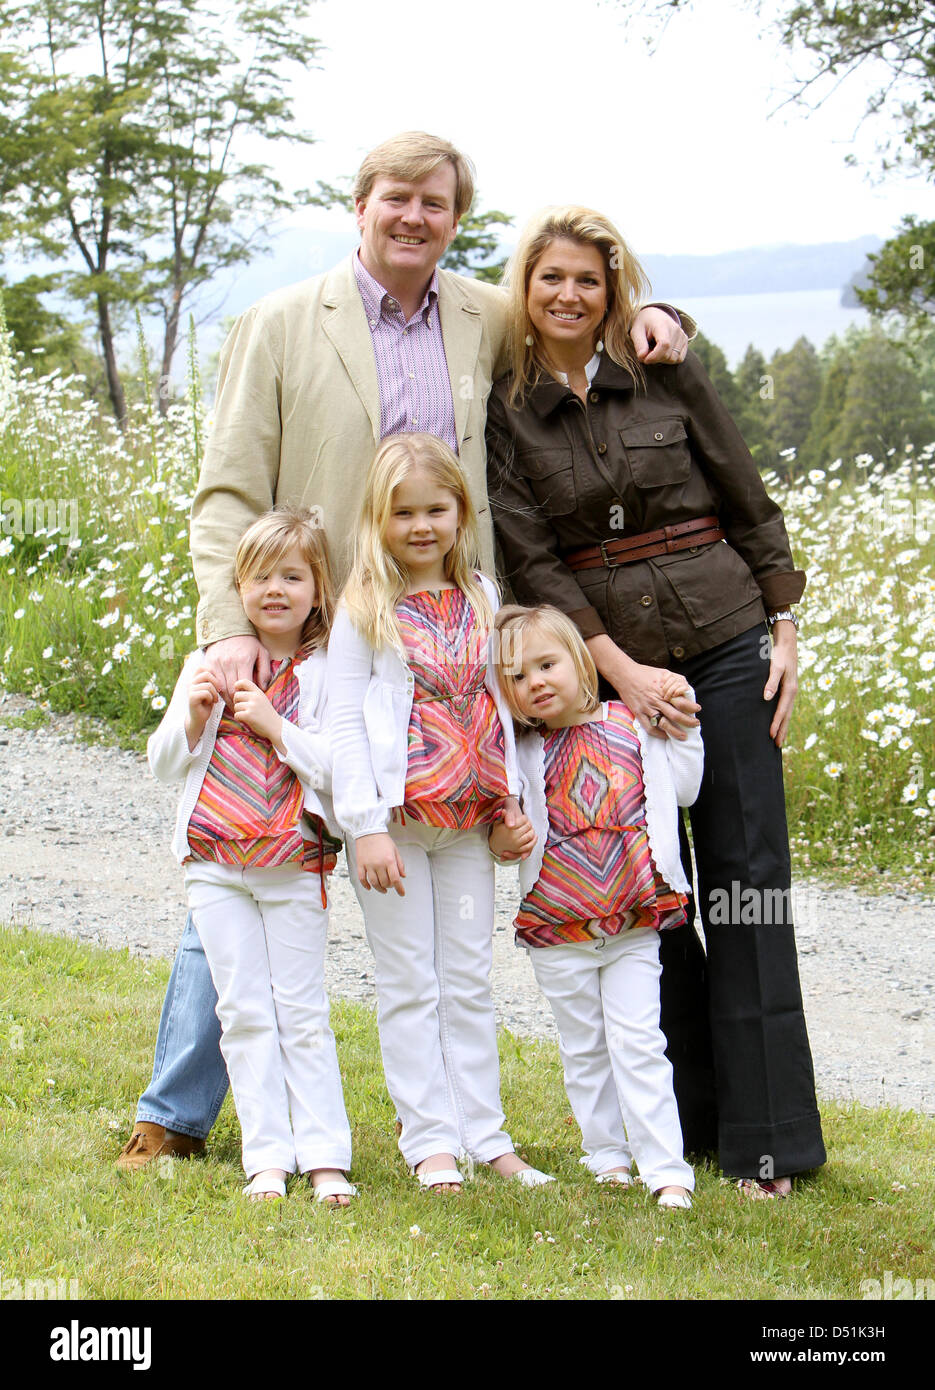 Dutch Crown Prince Willem-Alexander and his wife Princess Maxima pose with their daughters (L-R) Alexia, Amalia and Ariane for the photographers near the Nahuel Huapi lake in the Patagonia, southern Argentina, 19 December 2010. The Dutch family is in Argentina for their Christmas holidays.  Photo: Patrick van Katwijk Stock Photo